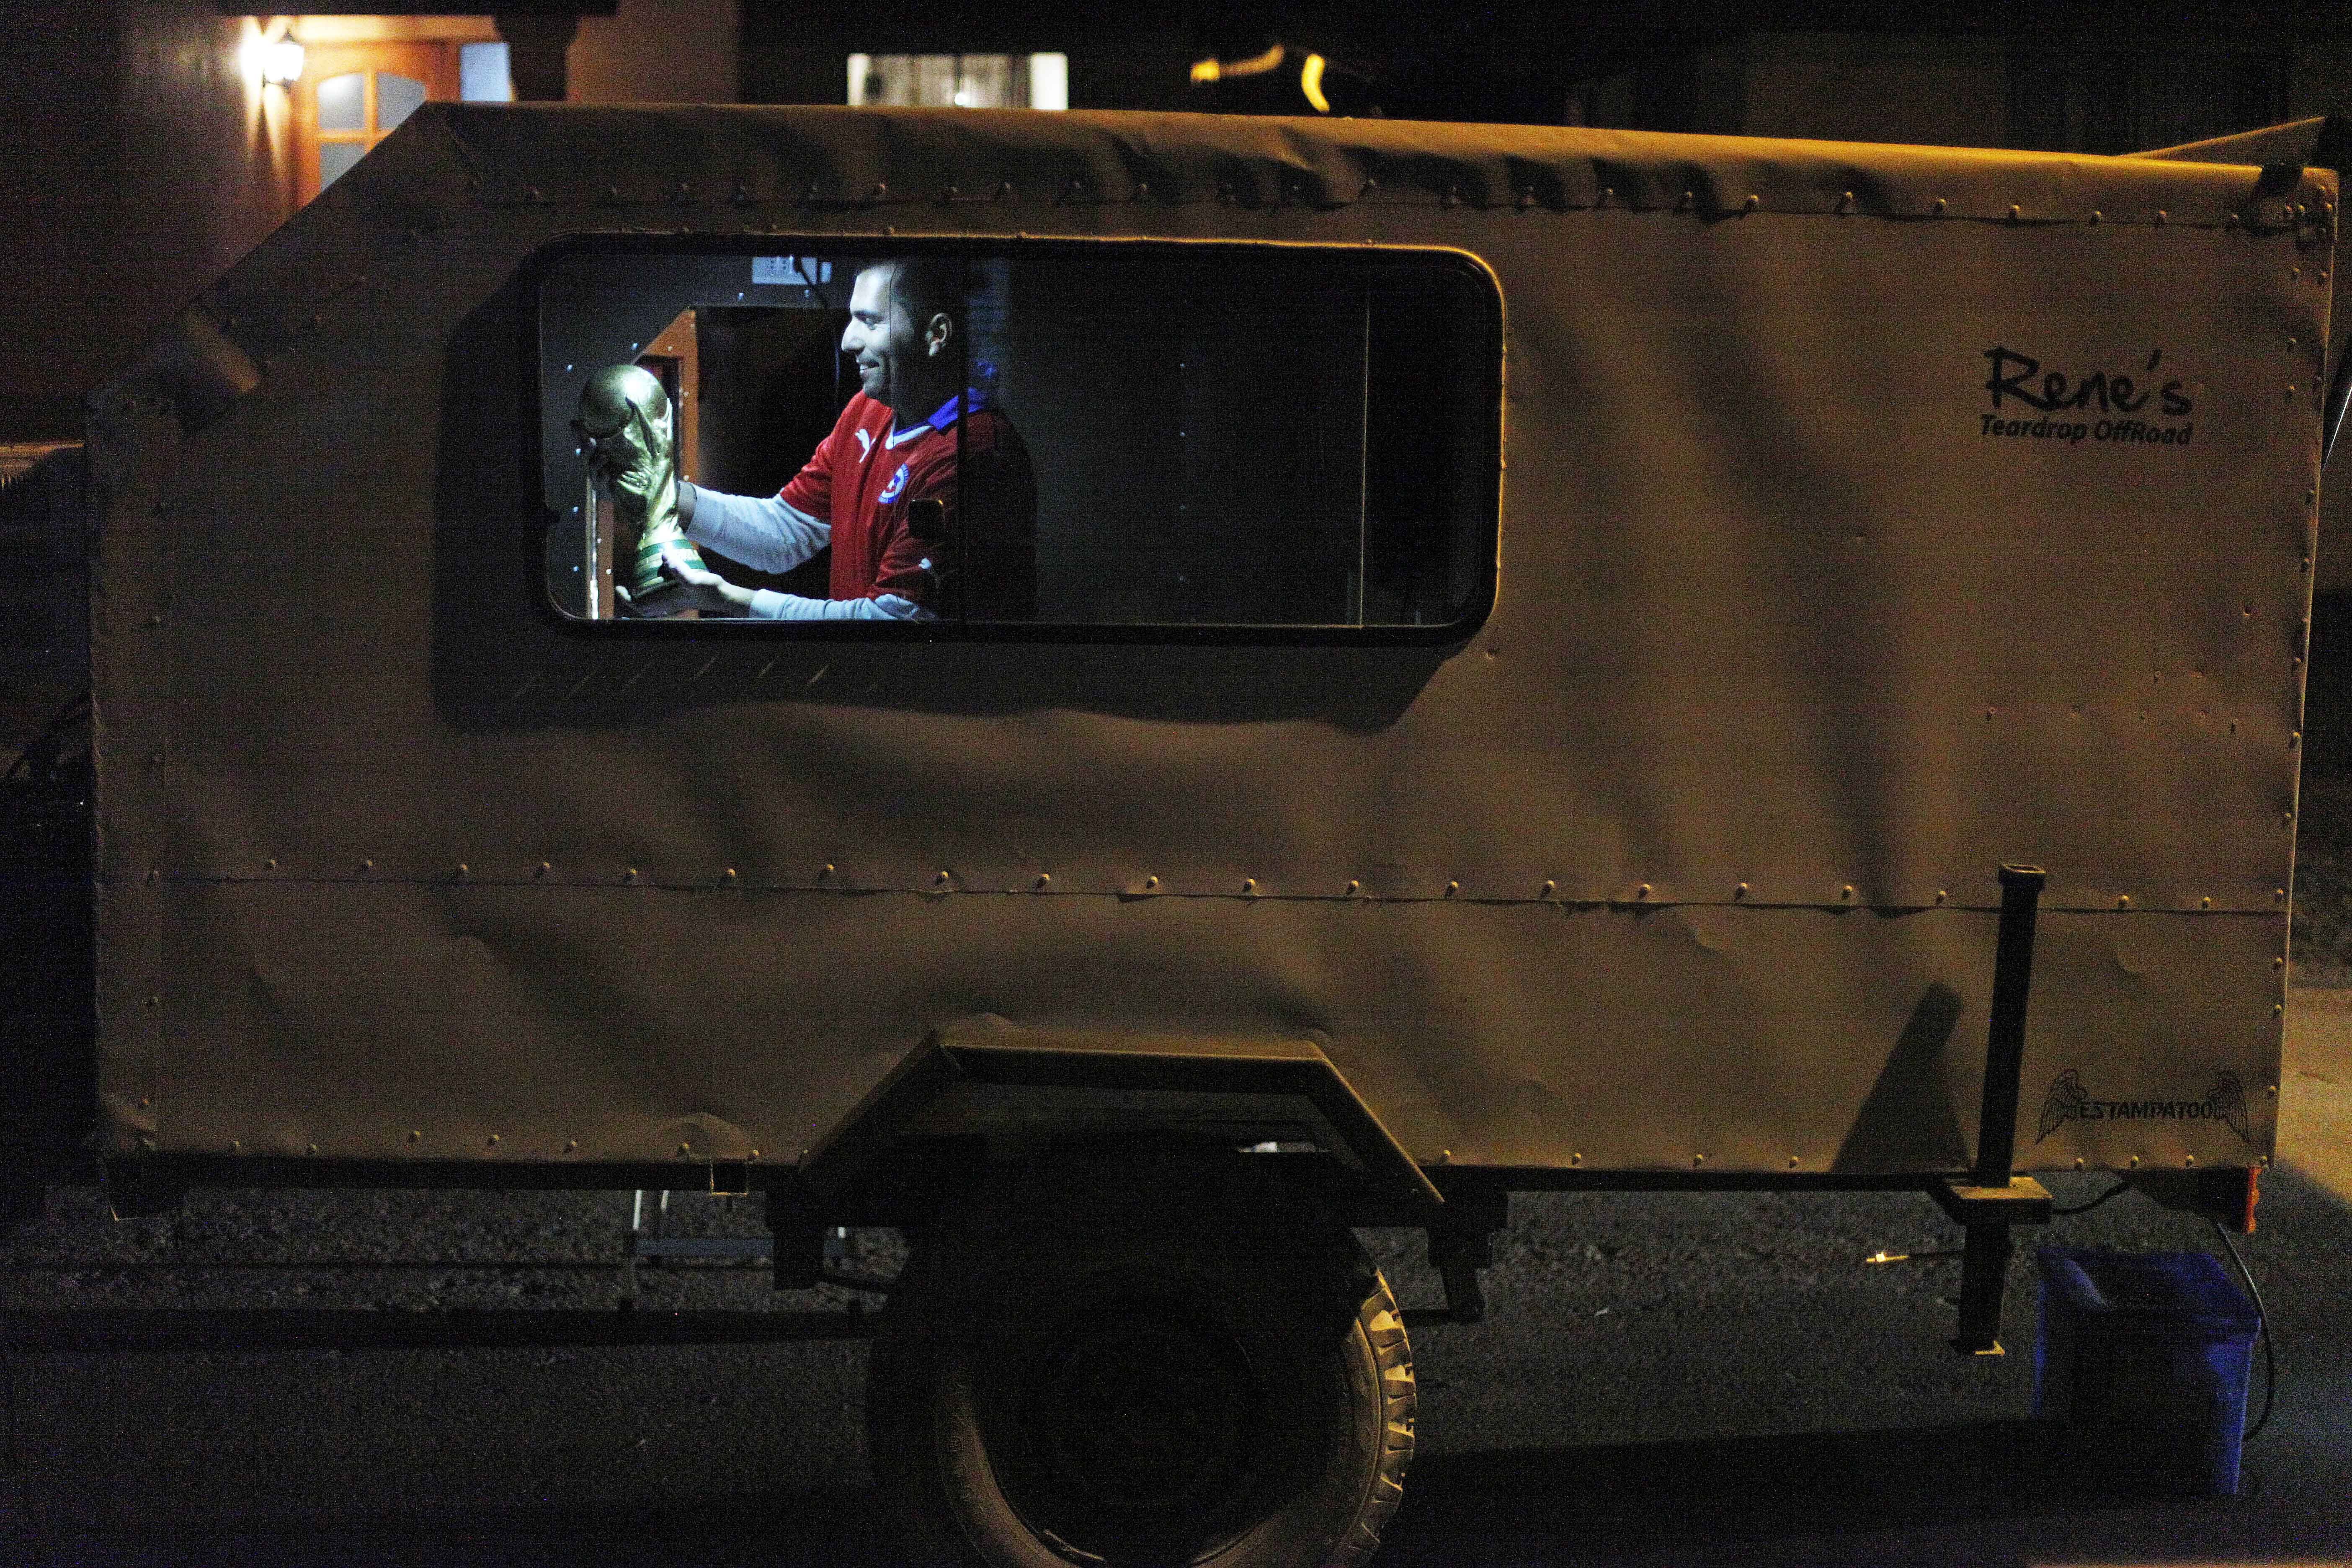 Chile soccer fan Cristian Uribarri holds up his replica of the World Cup trophy as he decides if he should take it and where to put it in his trailer, which he built from scratch, as he packs it for the next day's journey with four friends to Brazil from Santiago, Chile on jUne 5, 2014.